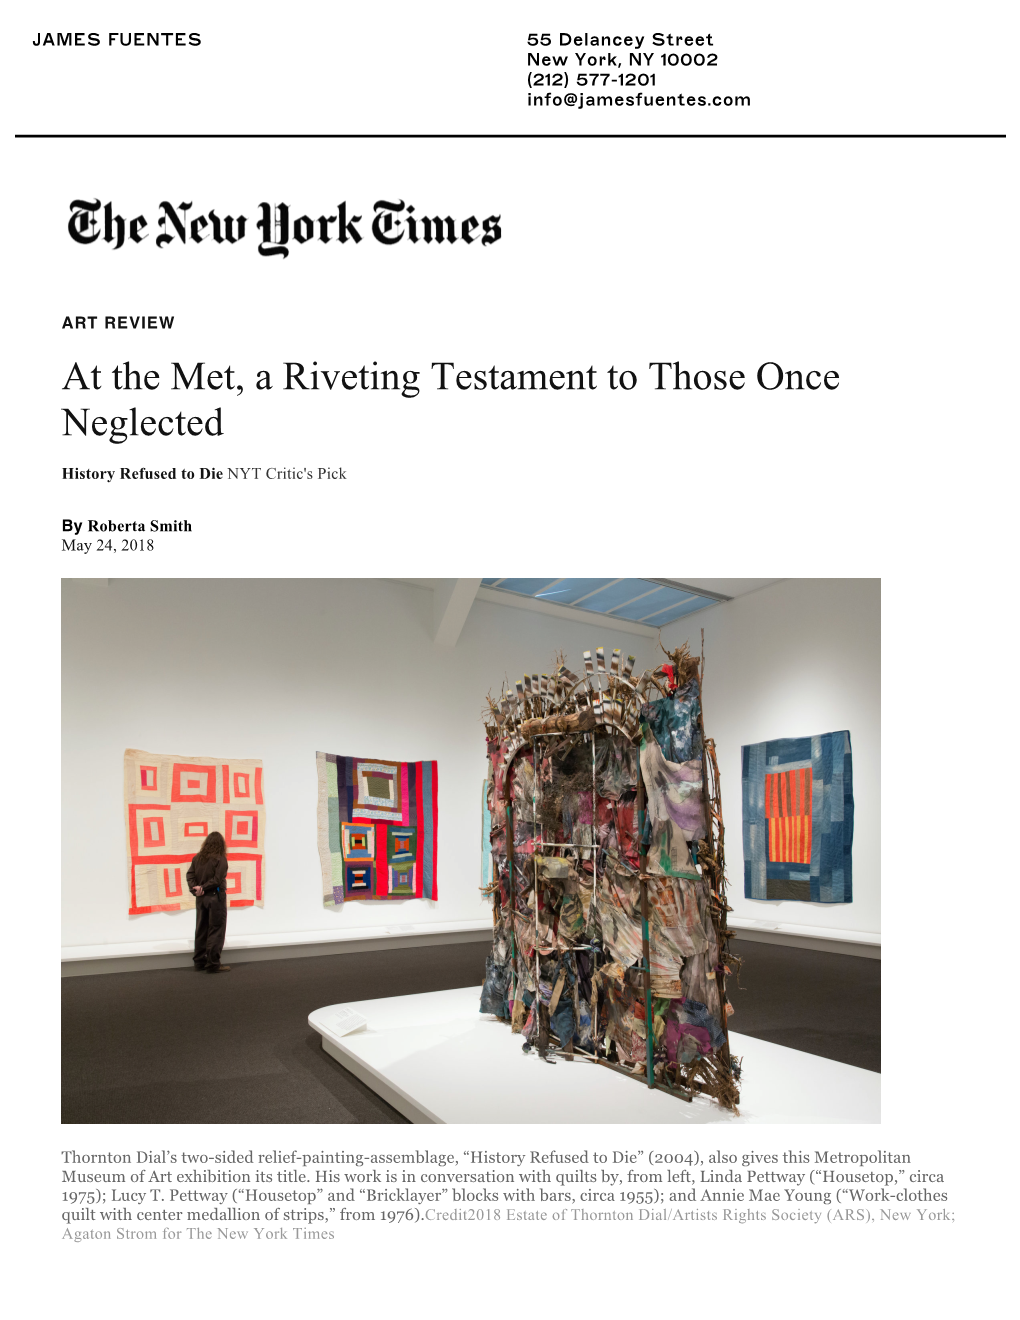 At the Met, a Riveting Testament to Those Once Neglected